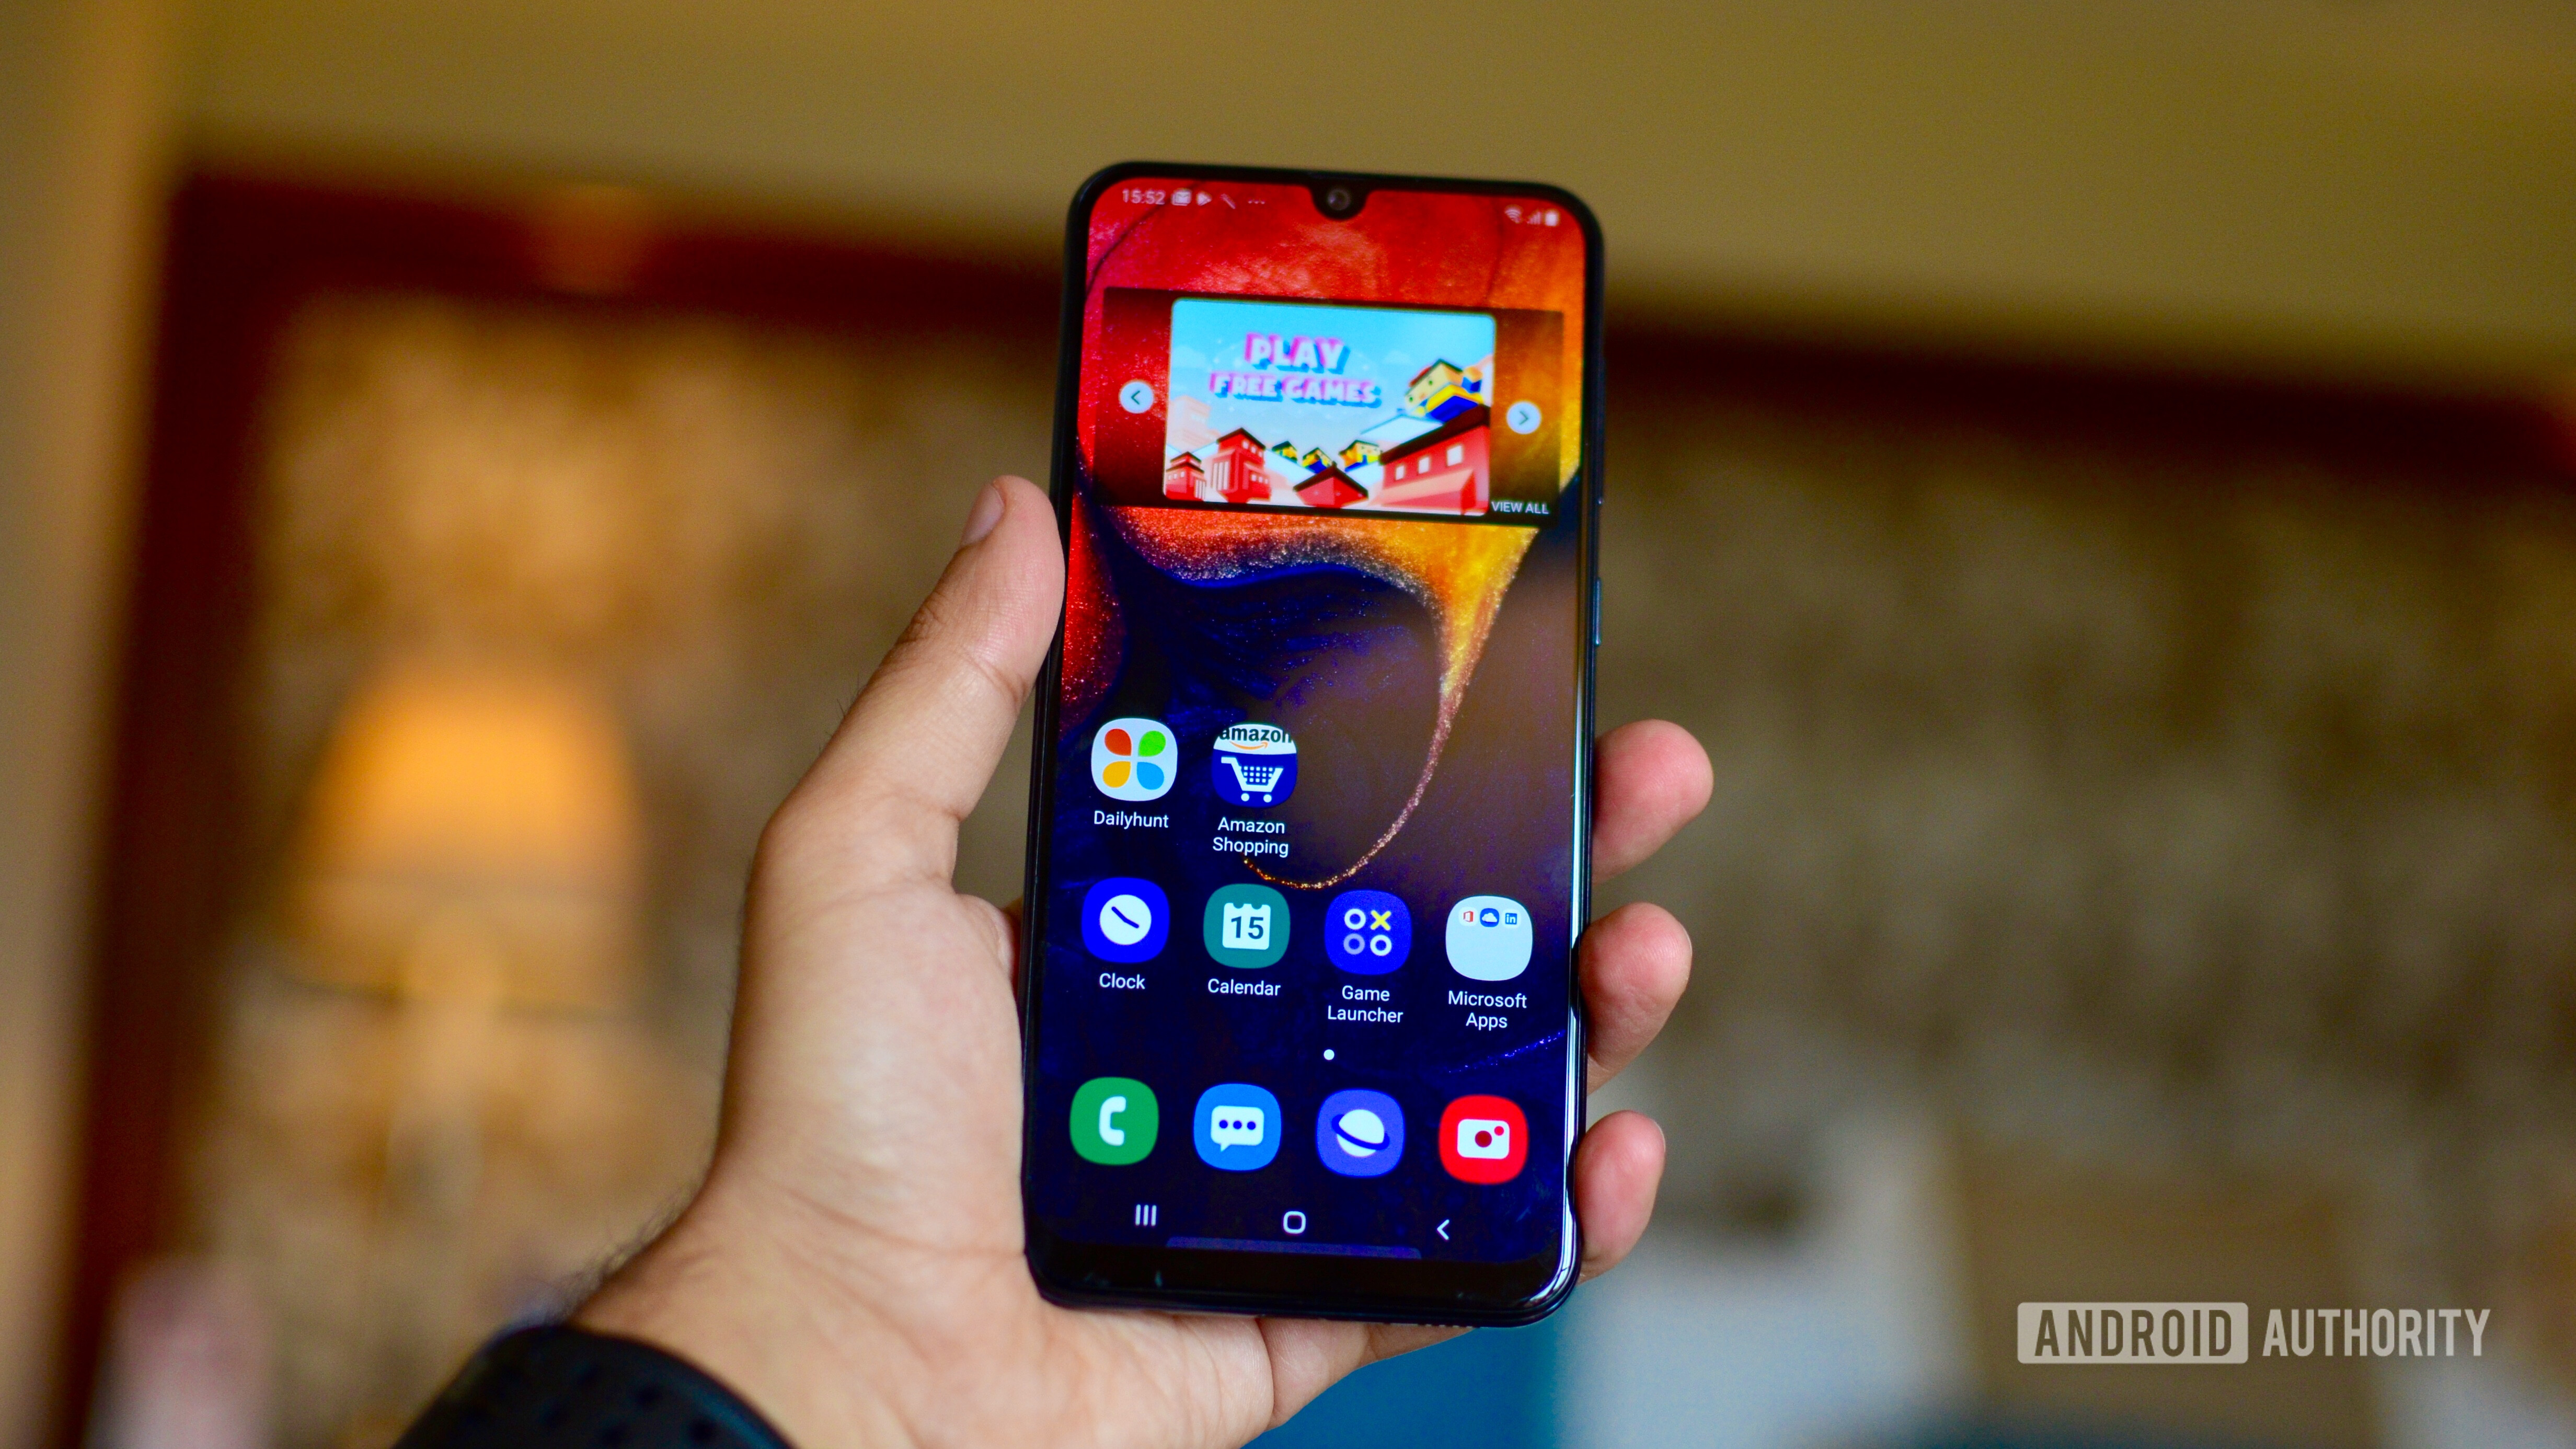 Samsung Galaxy A50 front display in hand